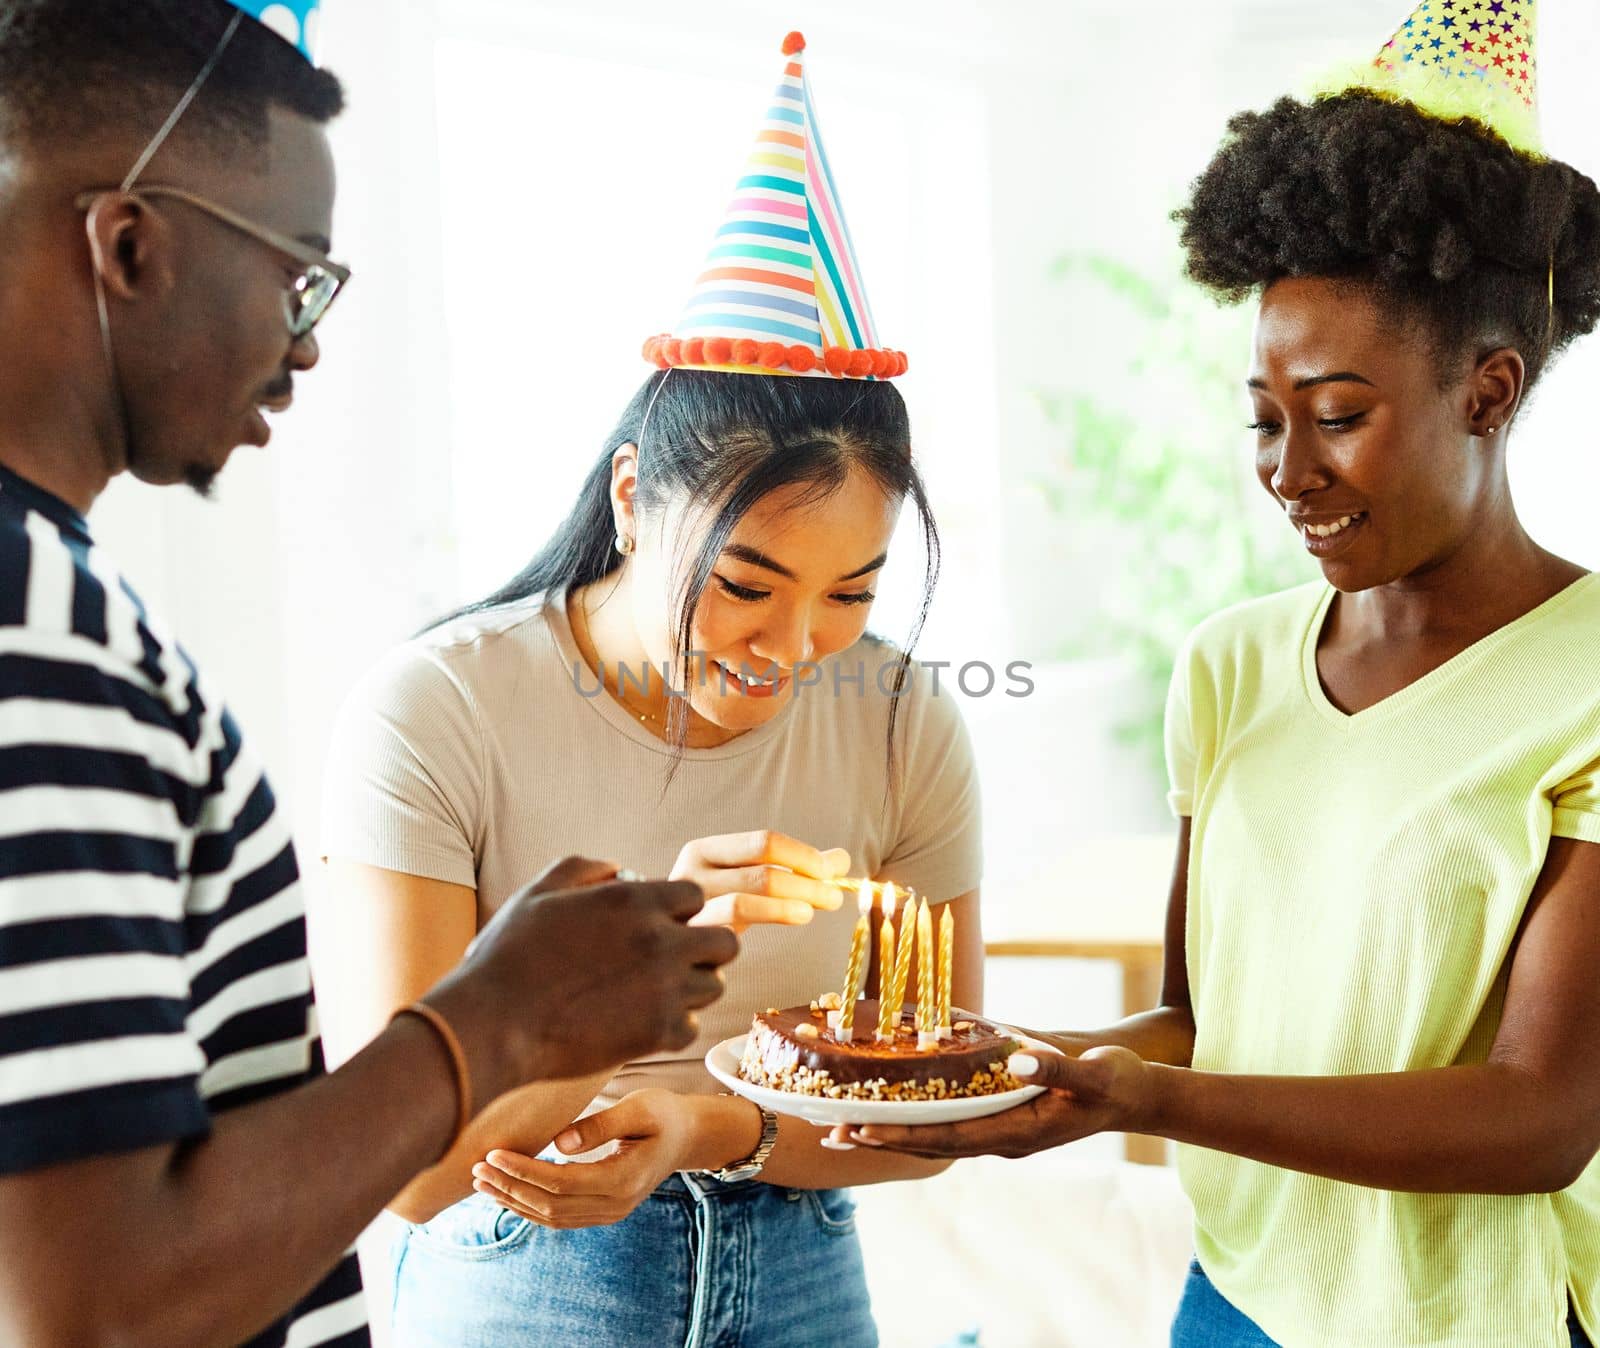 birthday celebration party cake happy candle blowing friendship fun friend woman home smiling lifestyle happy man cheerful by Picsfive